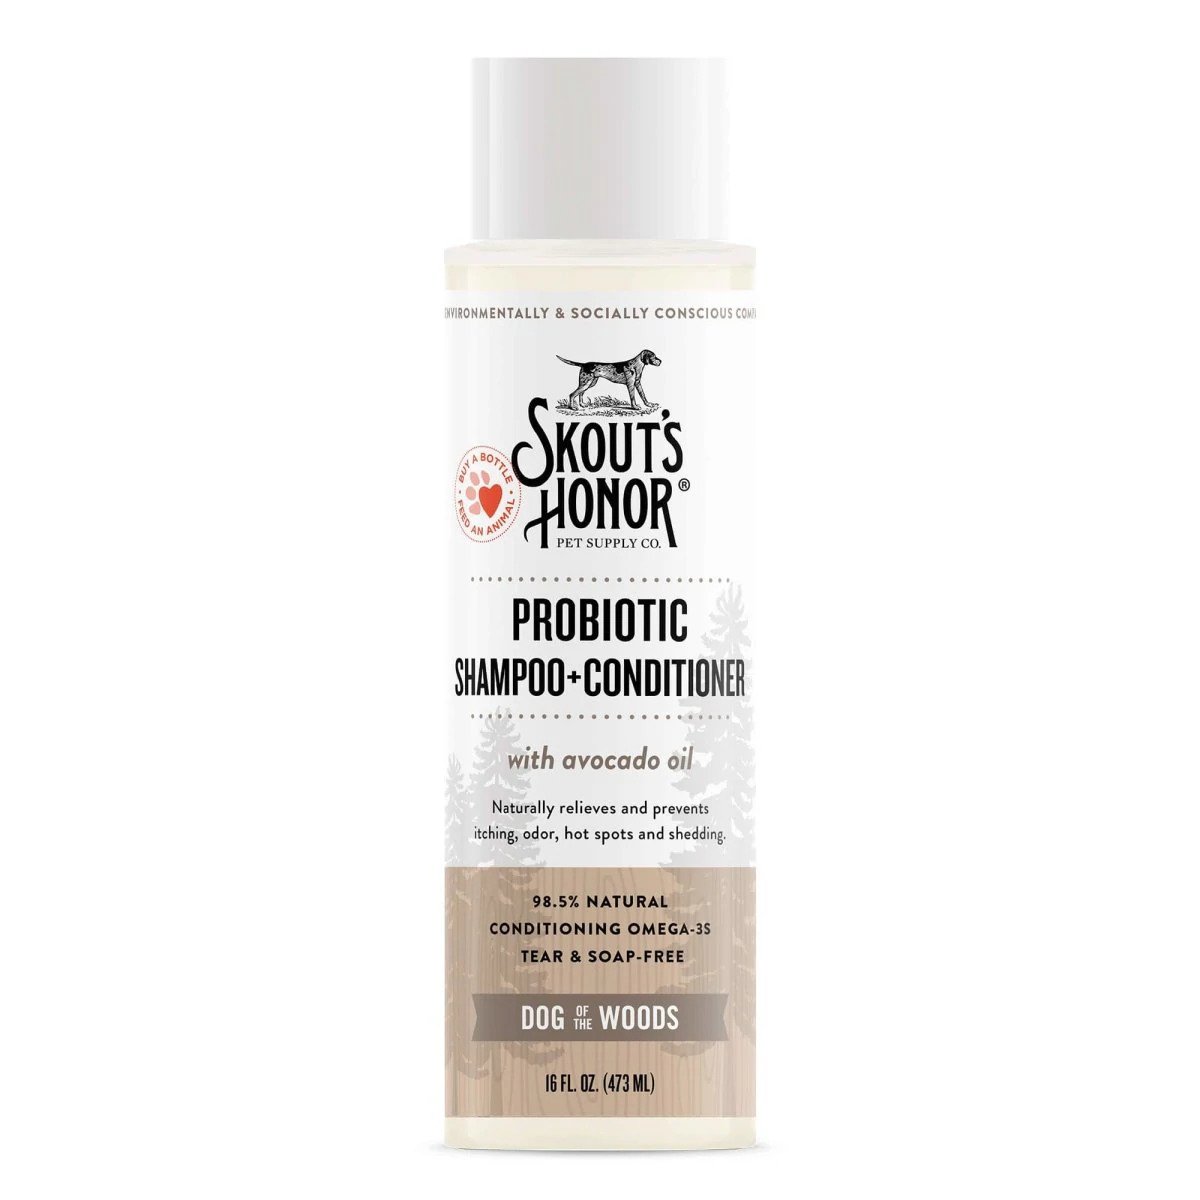 Skouts Honor Probiotic Shampoo Plus Conditioner Dog of the Woods Grooming 475ML